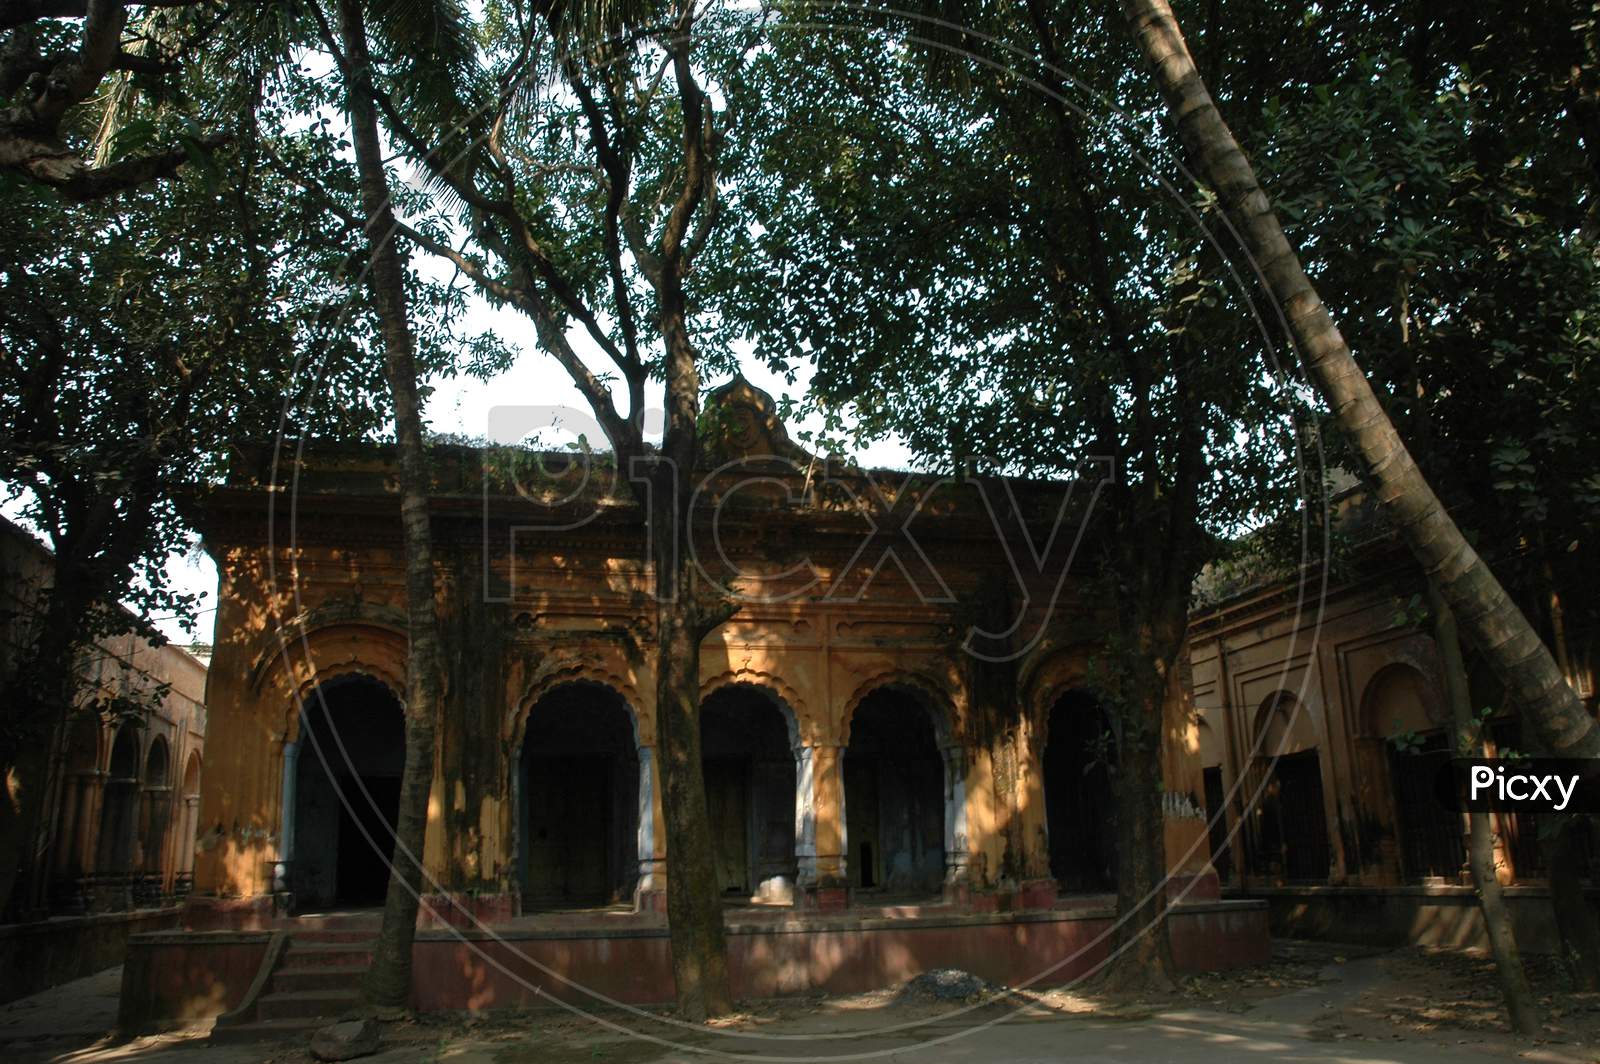 Architecture  of Ancient Buildings At Murshidabad, West Bengal